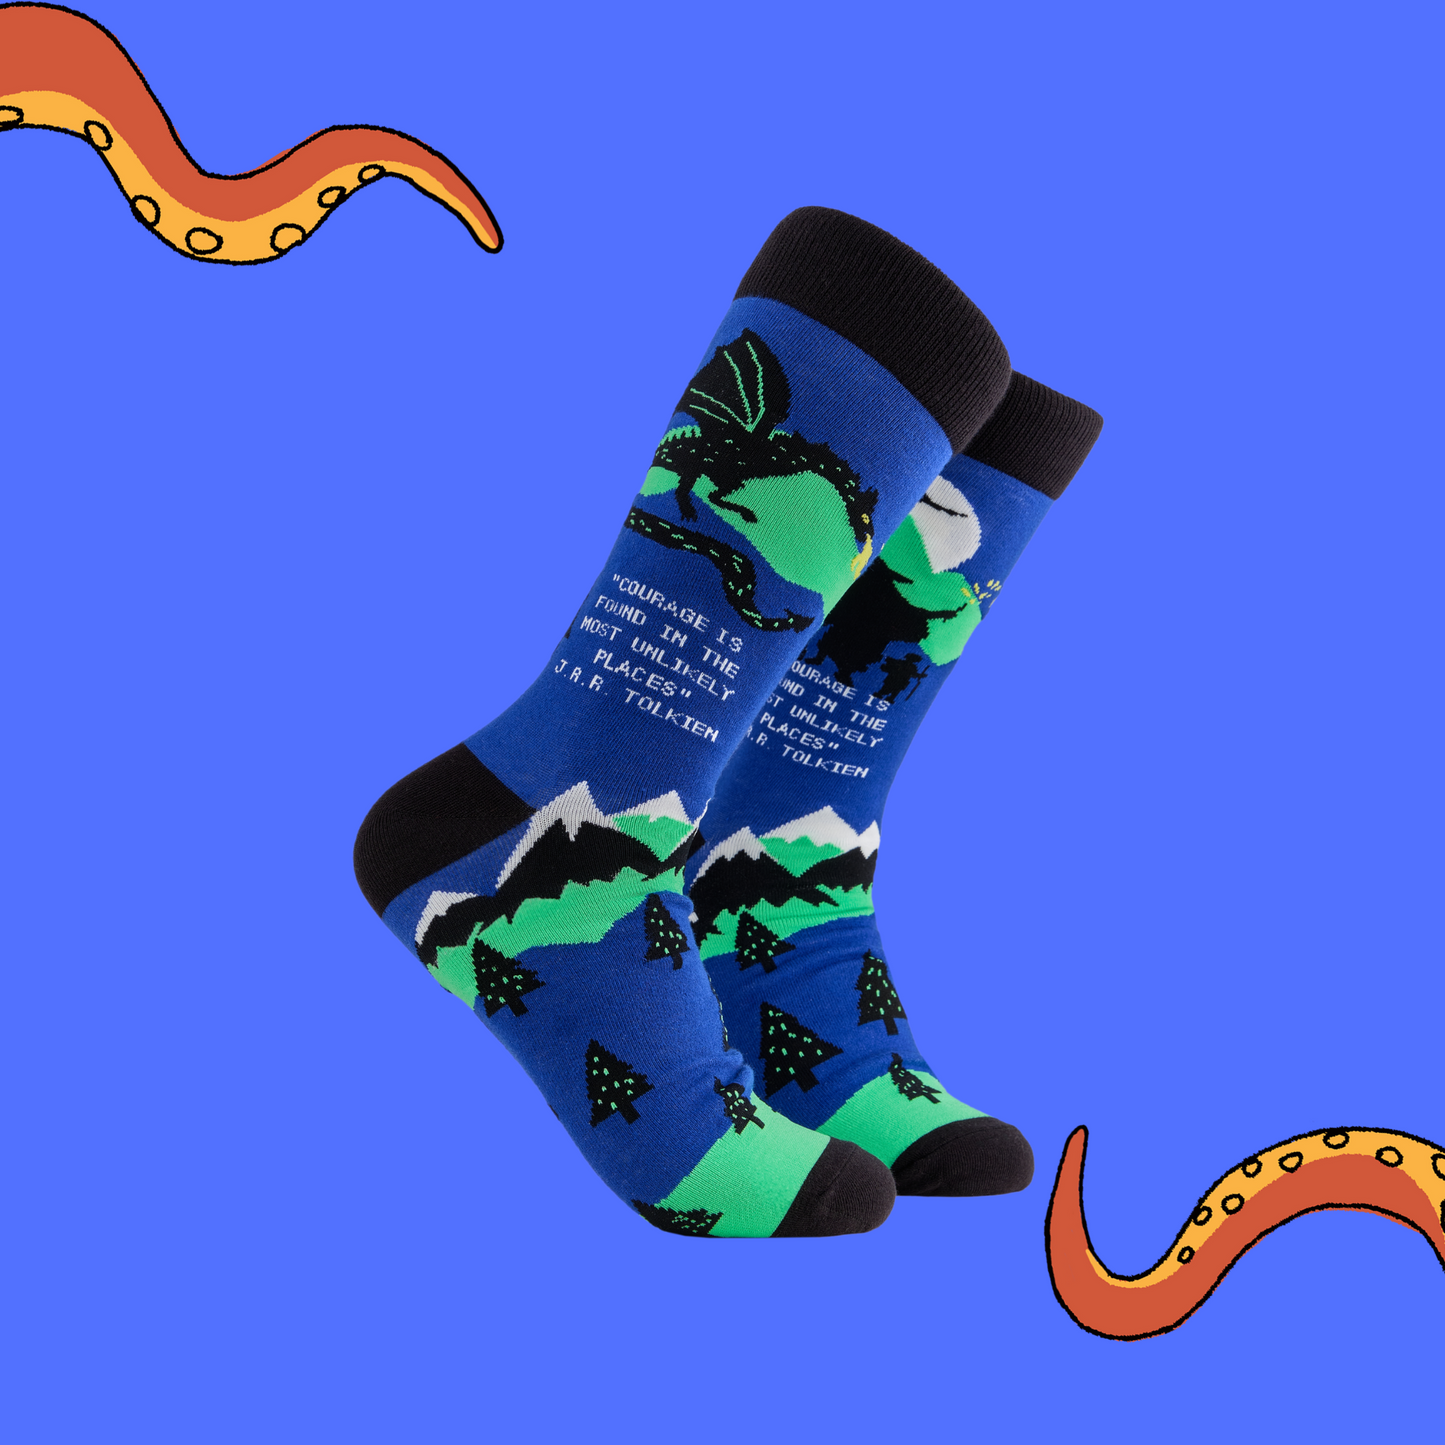 A pair of socks depicting middle earth. Blue legs, black cuff, heel and toe.